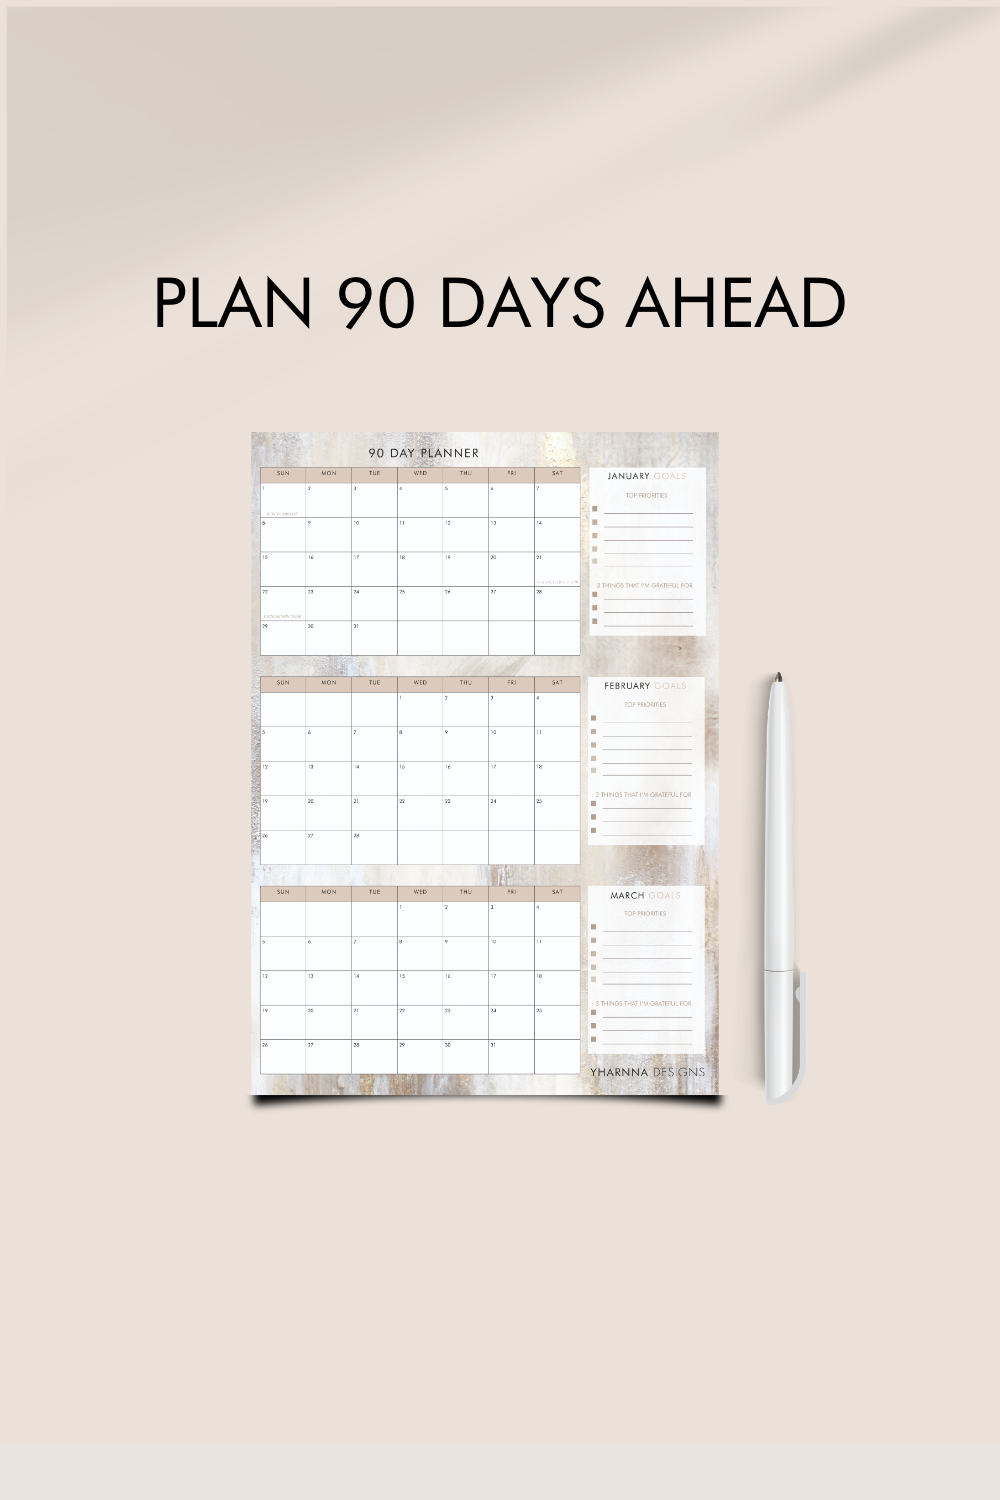 90 DAY PLANNER PRINTABLE DOWNLOAD